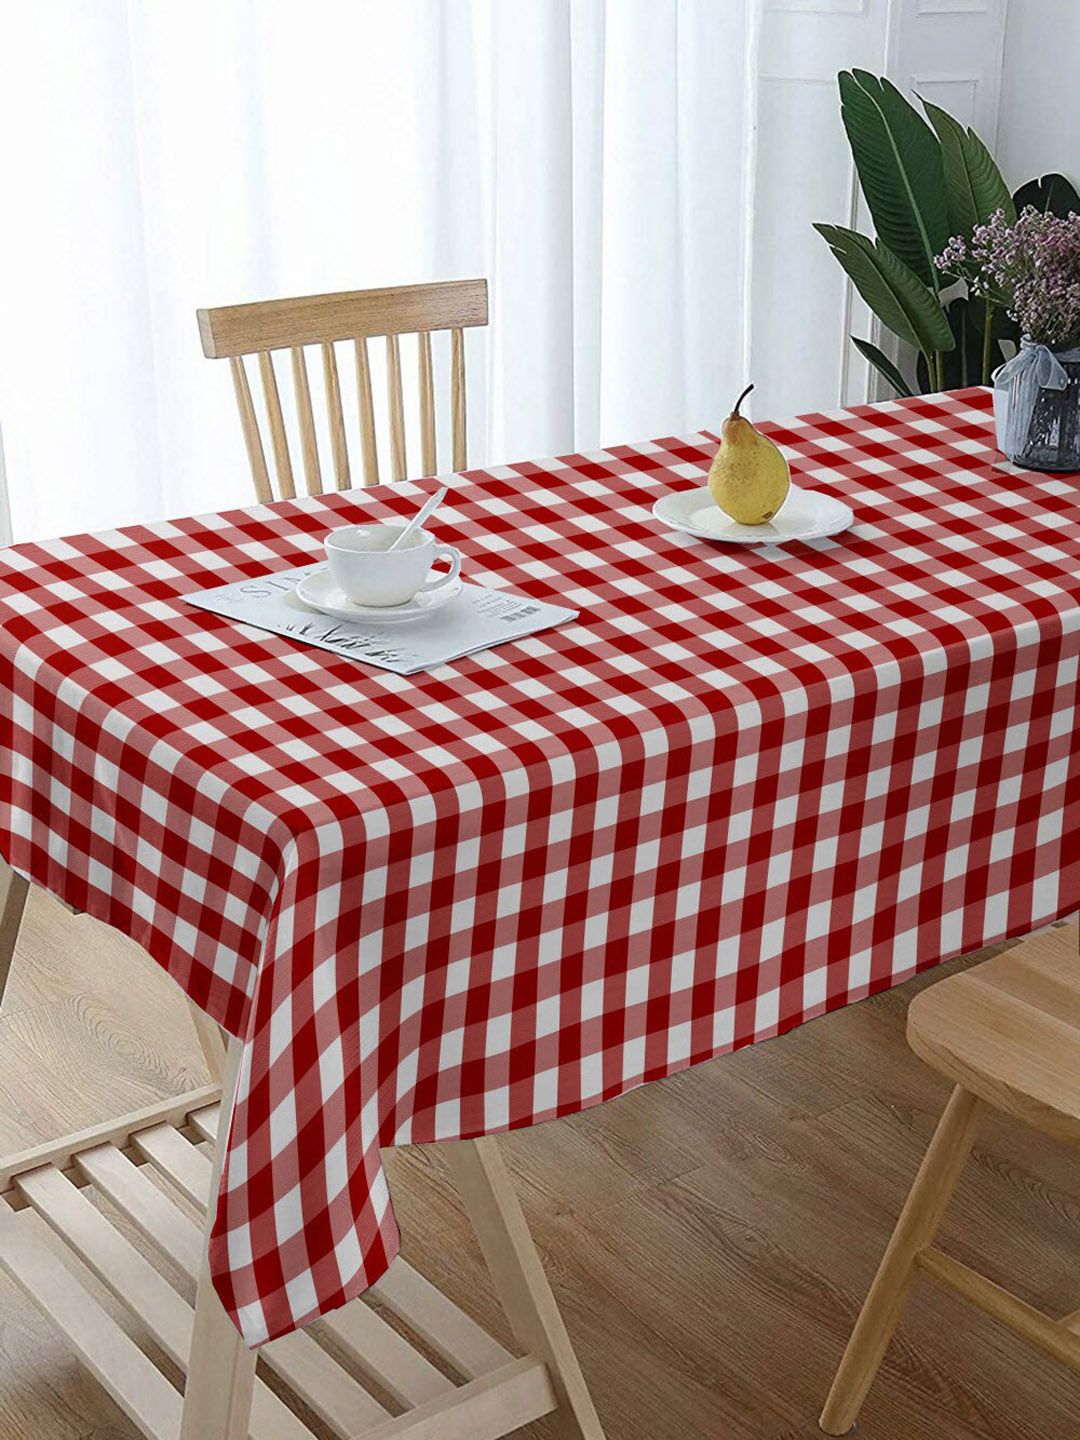 Lushomes Red & White Checked Rectangular 6-Seater Cotton Table Cloth Cover Price in India